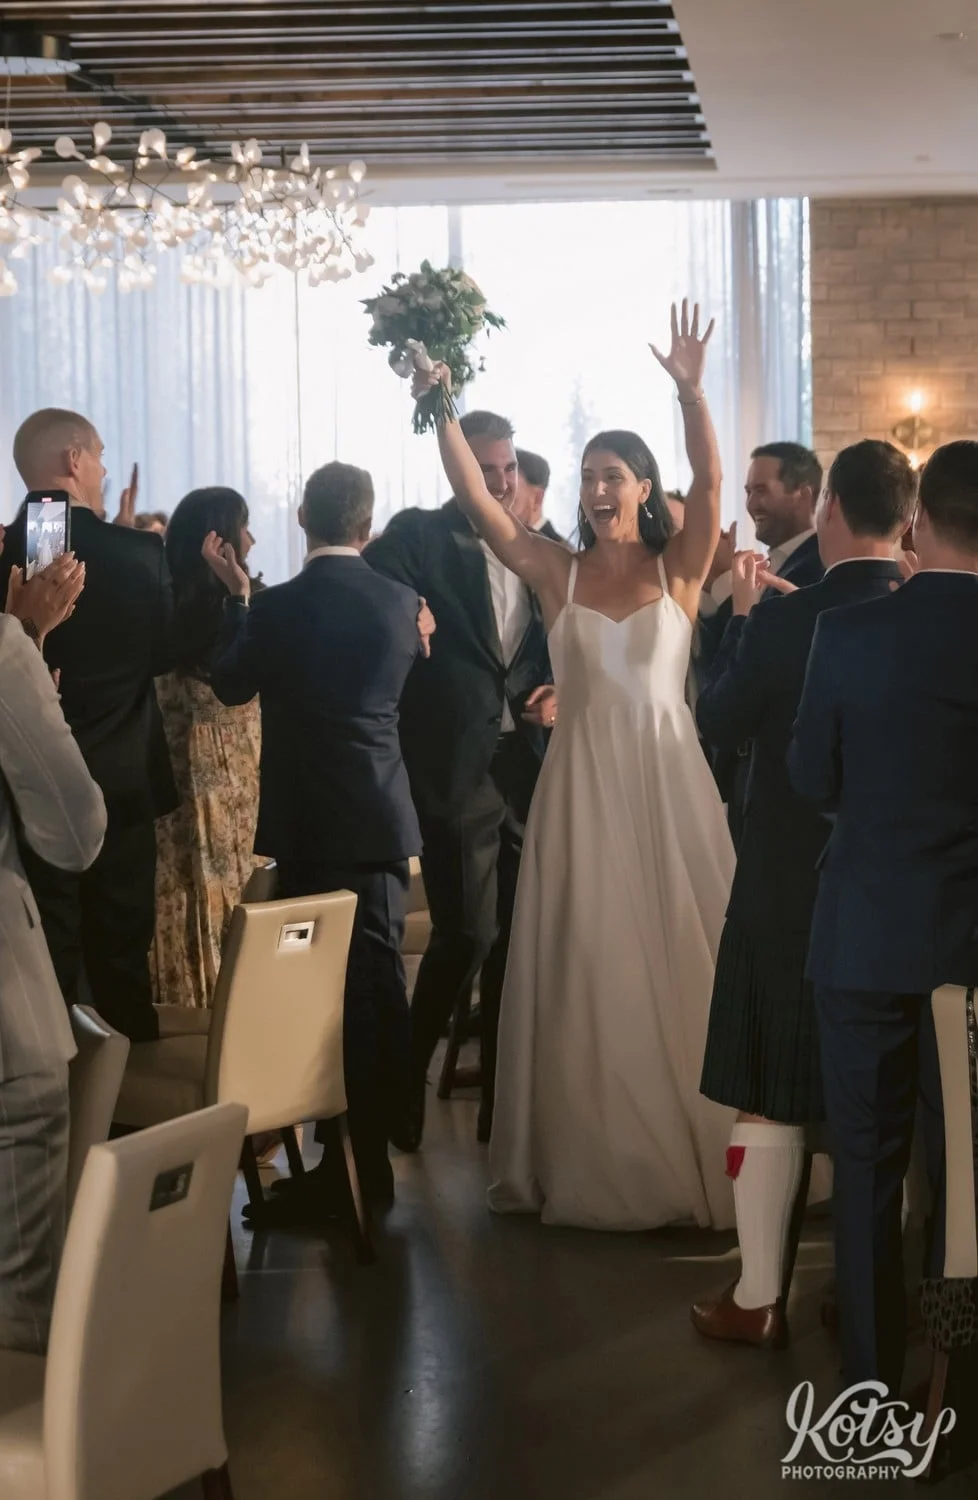 A bride has her hands up in the air as she and her groom make their entrance during their Village Loft wedding reception in Toronto, Canada